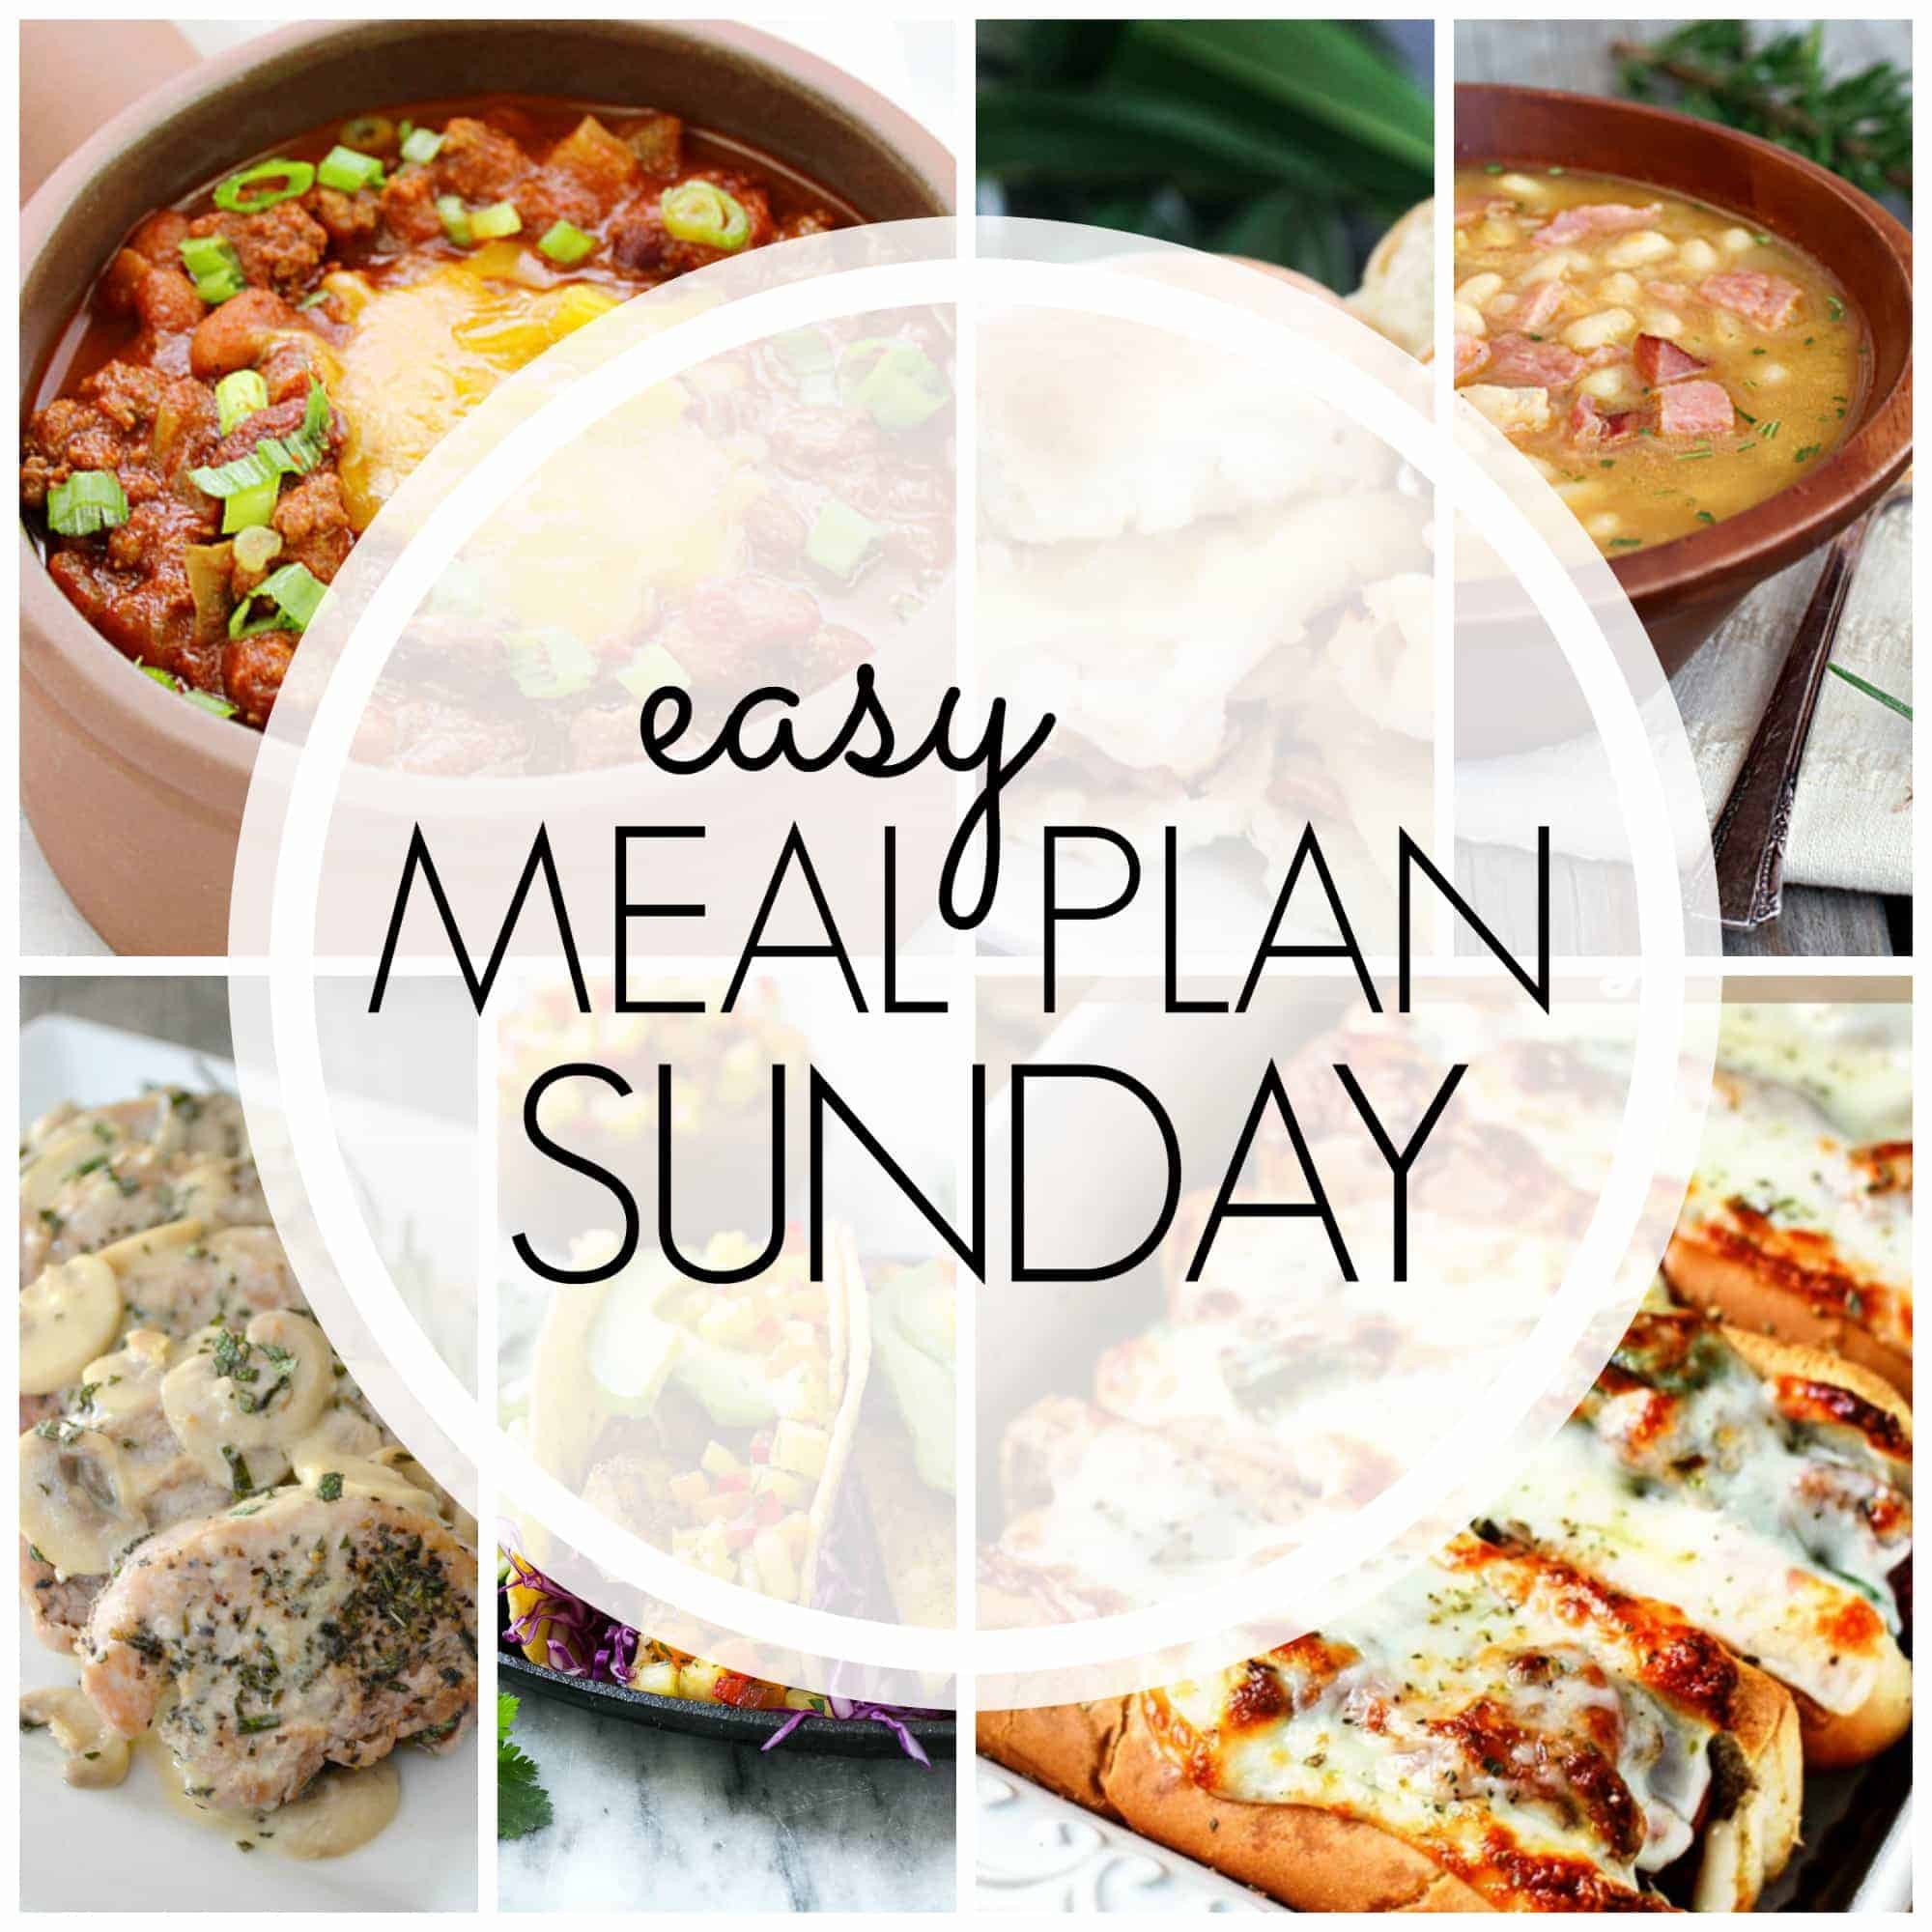 With Easy Meal Plan Sunday Week 68 - six dinners, two desserts and a breakfast recipe will help you remove the guesswork from this week's meal planning.